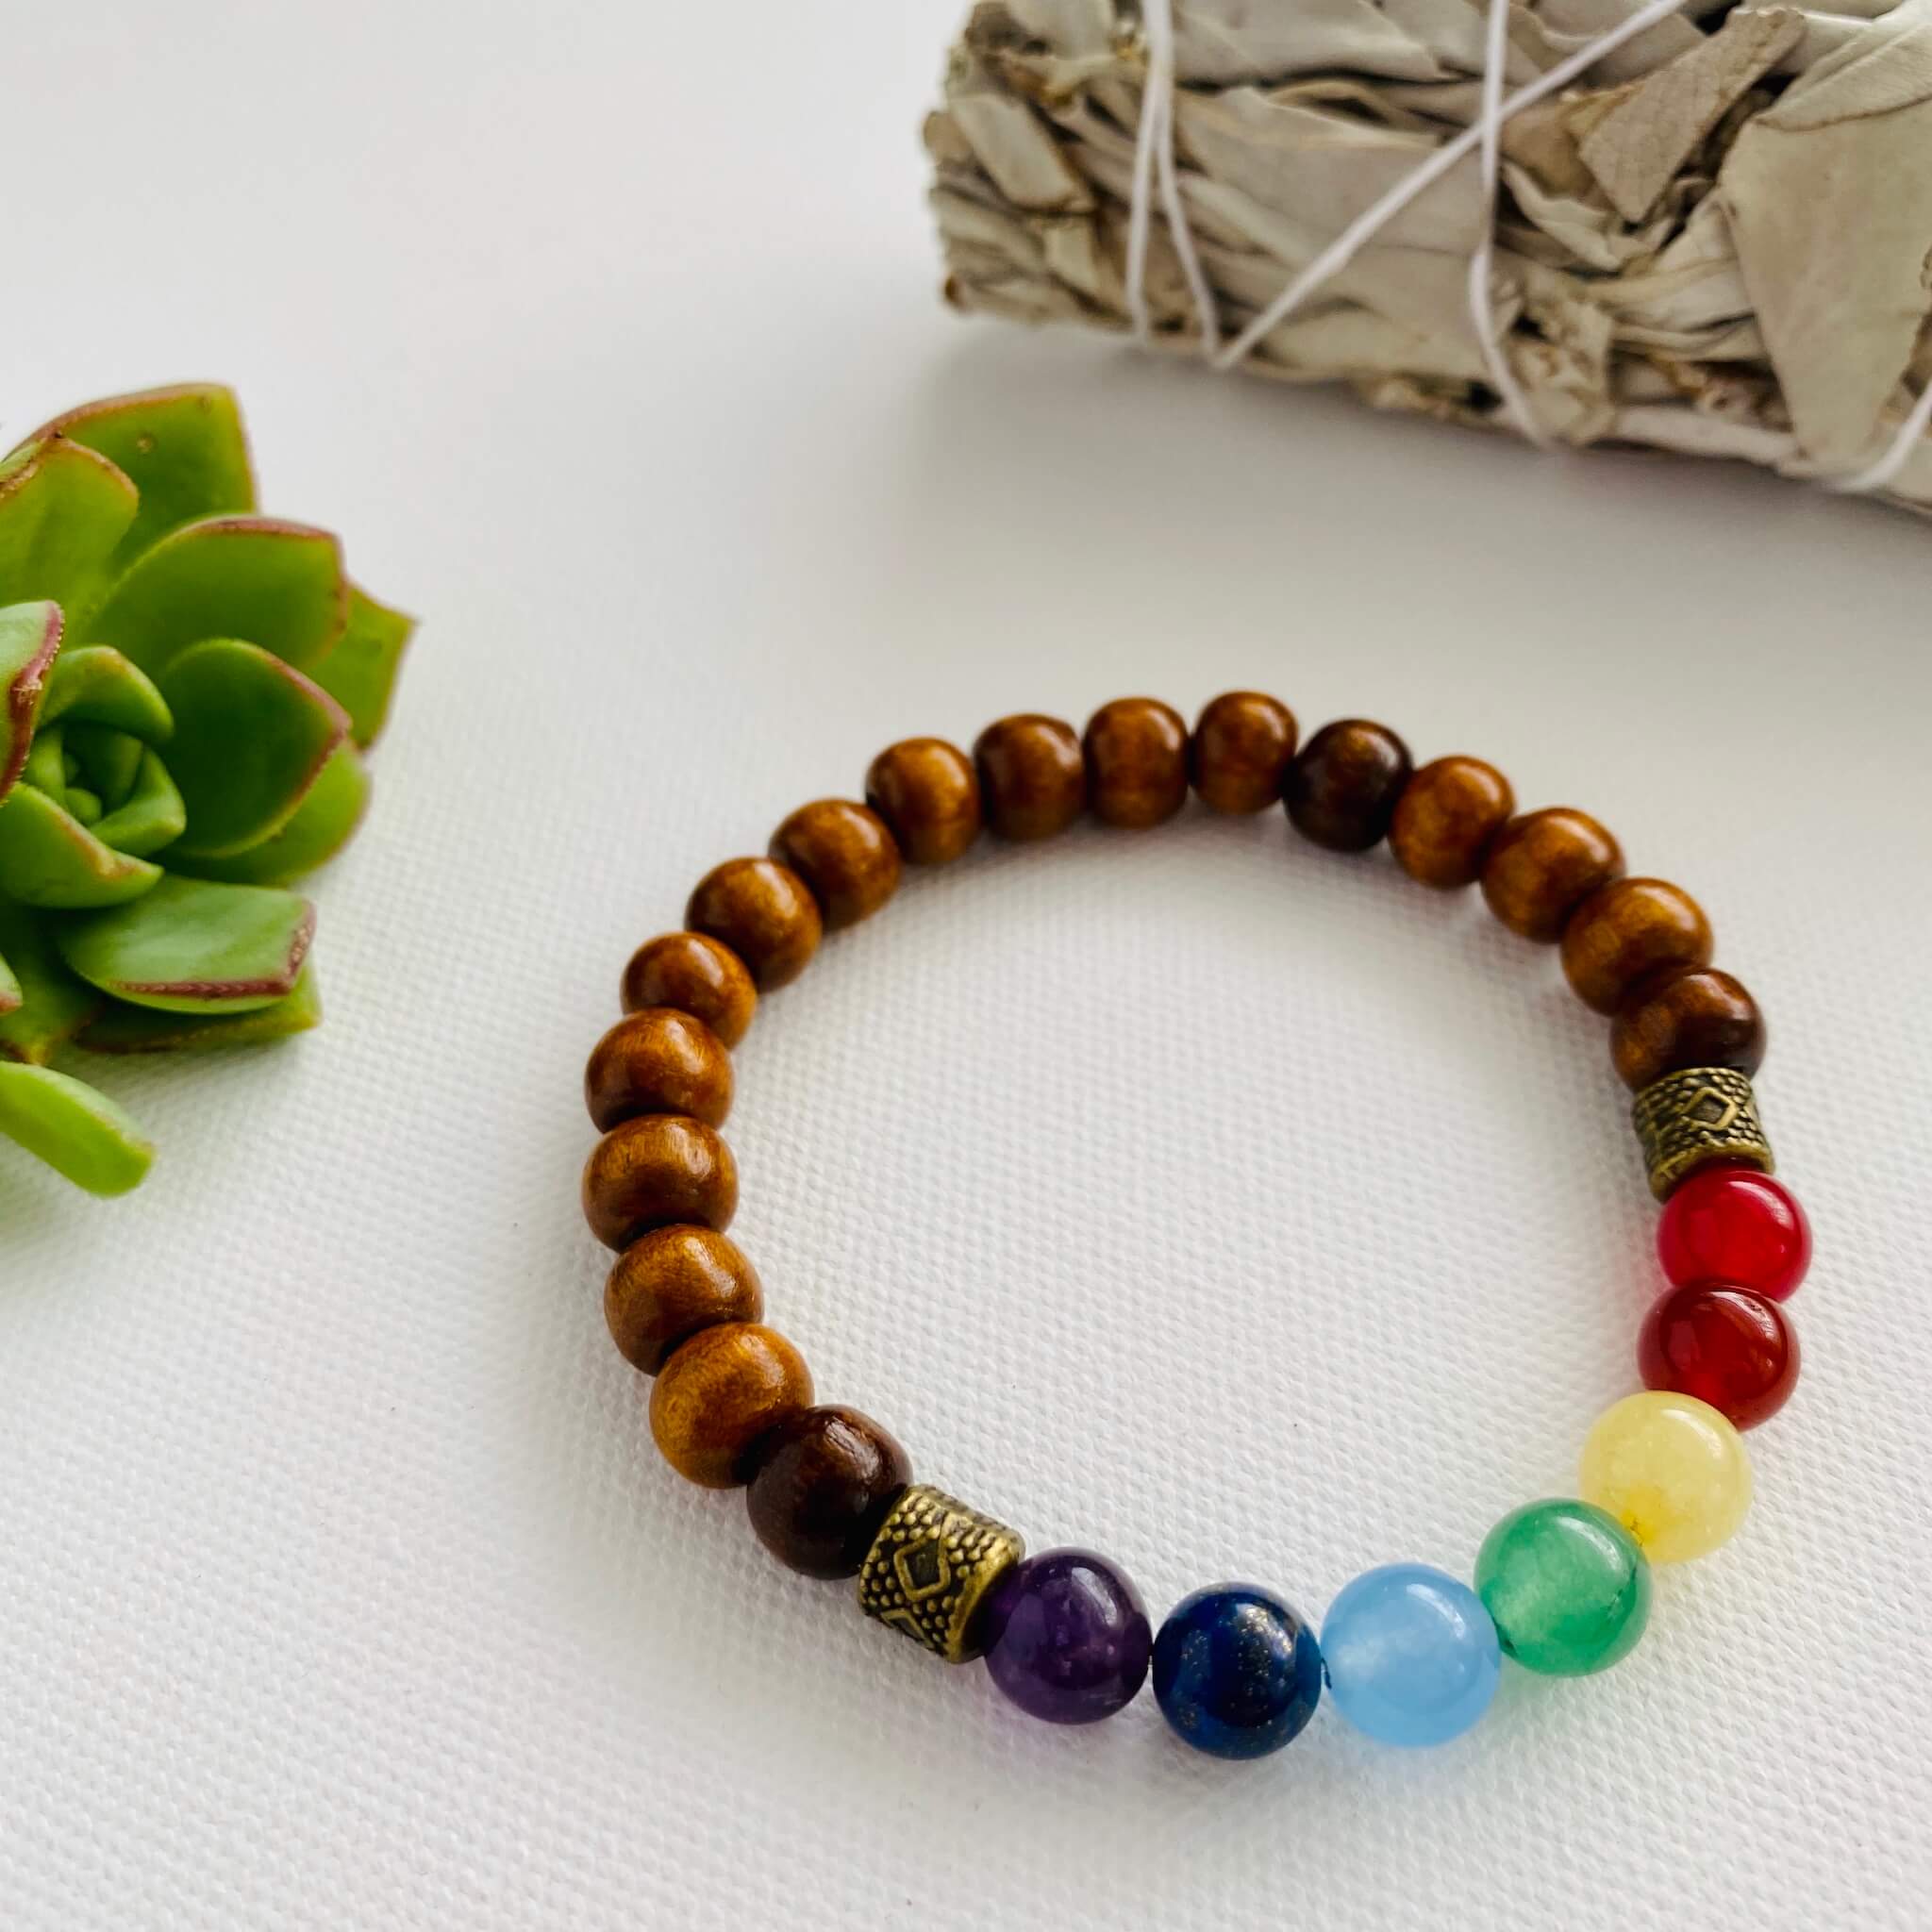 Gem Mines - Certified Stones By Govt. Lab - The 7 chakra healing bracelet  is a blessing for those suffering from emotional stress, alcoholism and  other ailments. Wear the 7 chakra healing